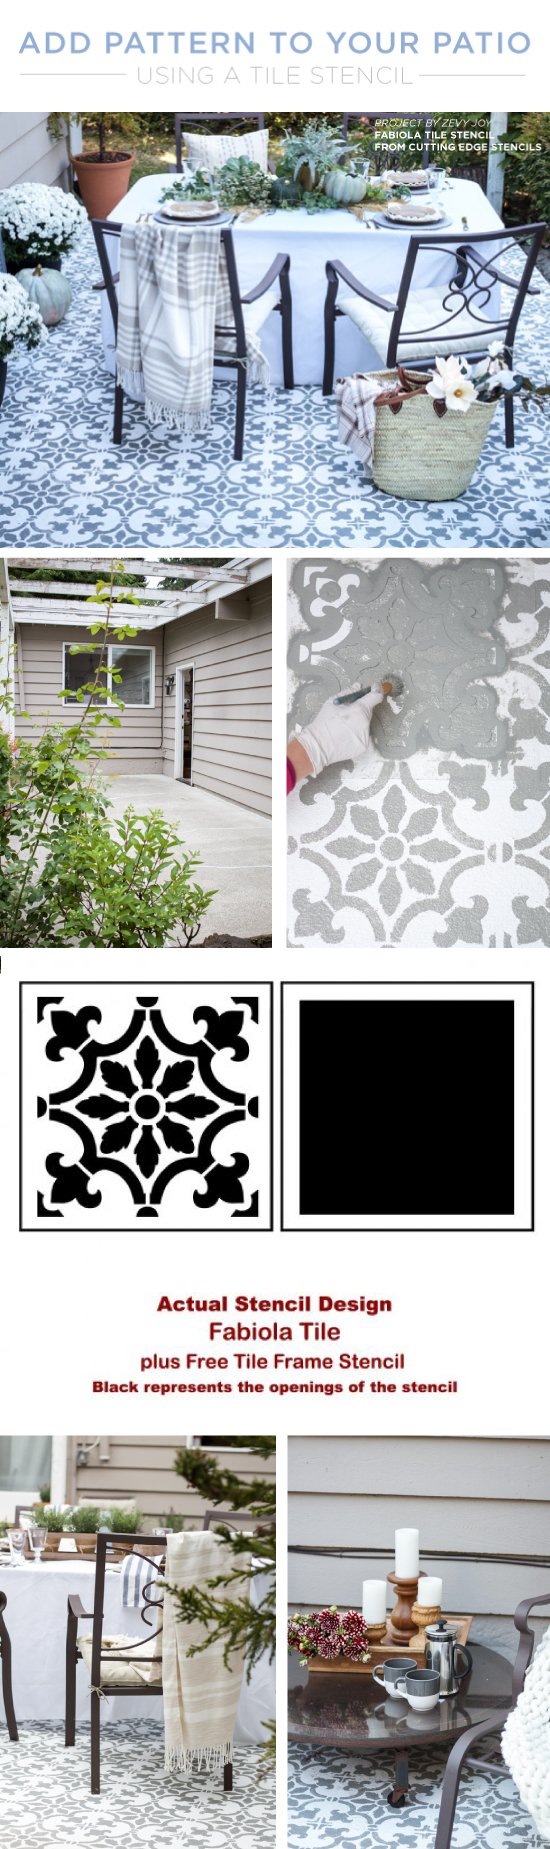 Cutting Edge Stencils shares a DIY stenciled cement patio makeover using the Fabiola Tile Stencil. http://www.cuttingedgestencils.com/fabiola-tile-stencil-spanish-portugese-tiles-stencils.html